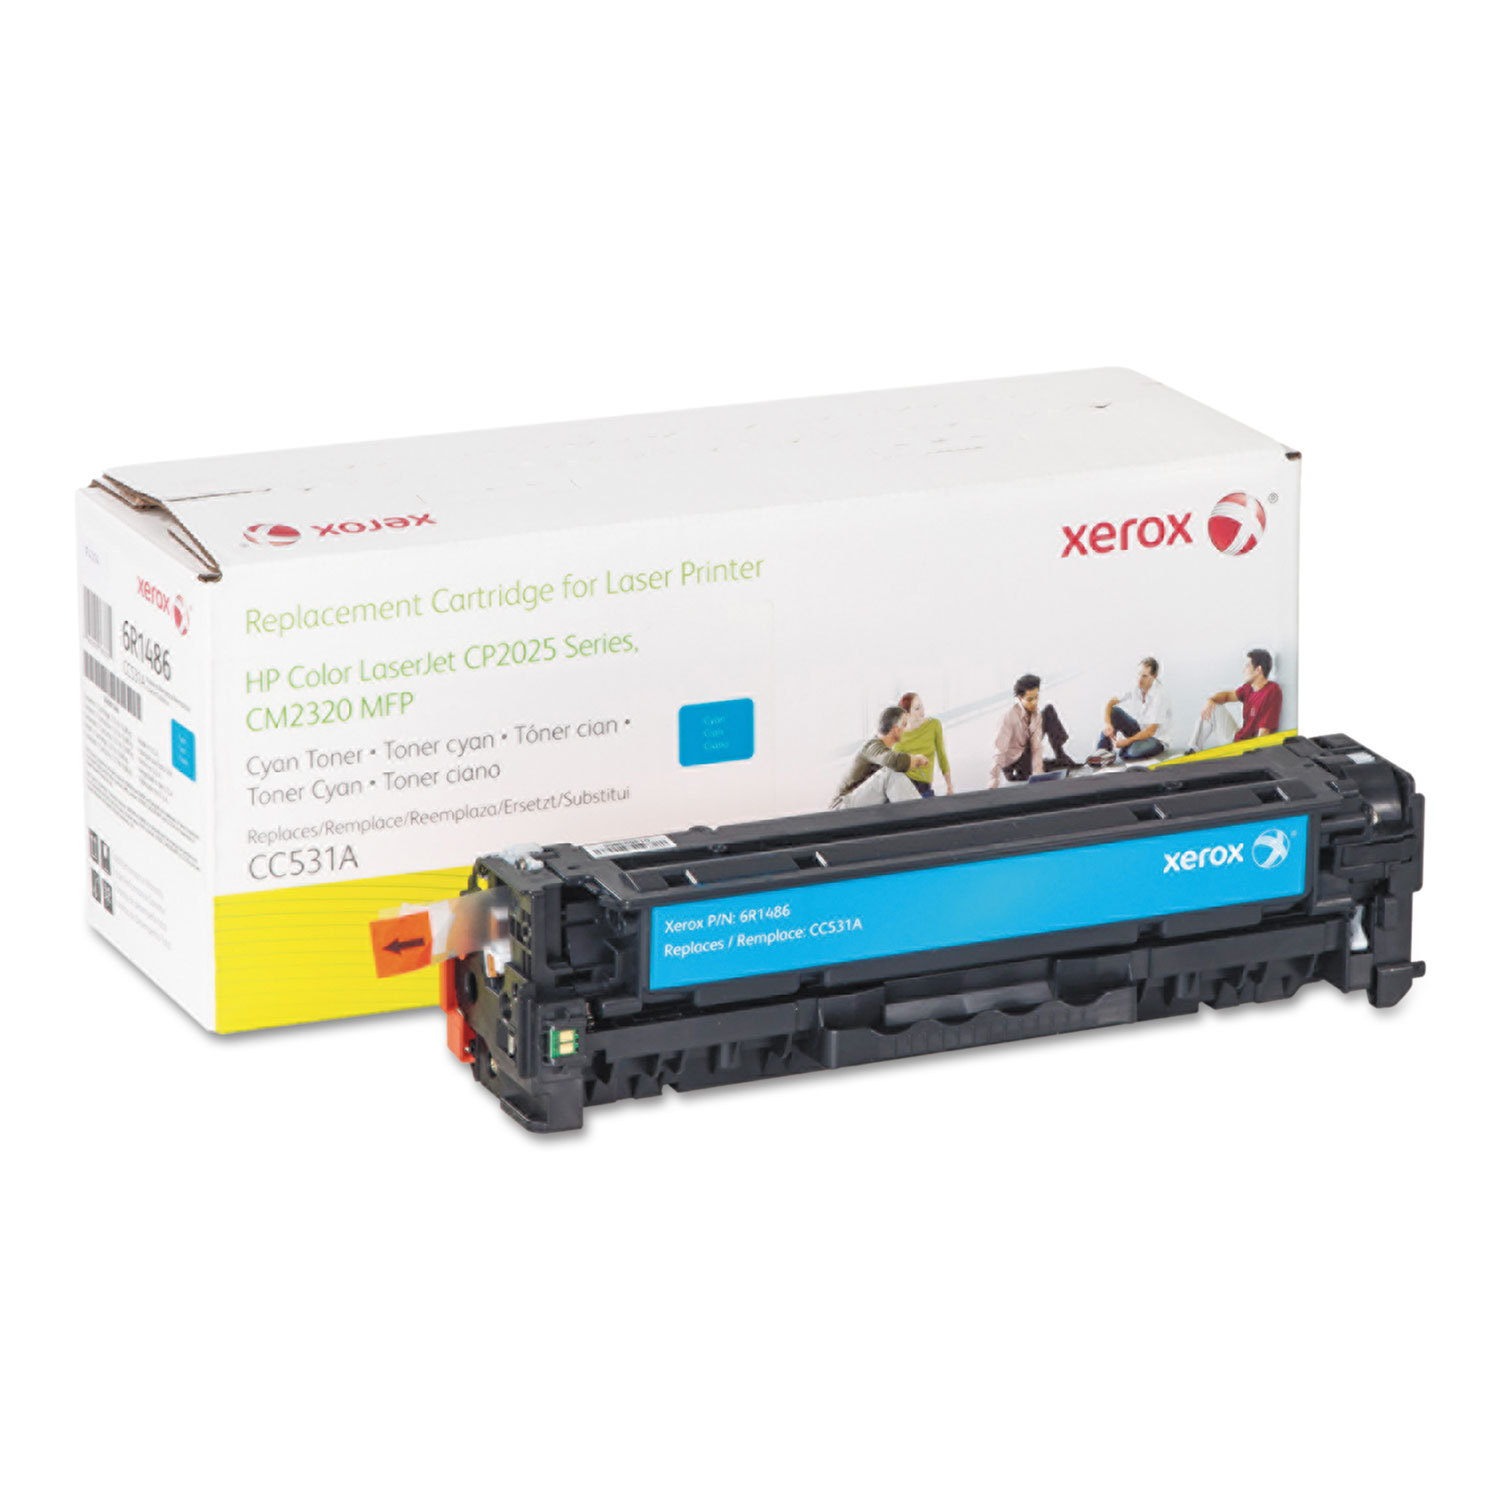  Xerox 006R01486 006R01486 Replacement Toner for CC531A (304A), 2800 Page Yield, Cyan (XER006R01486) 